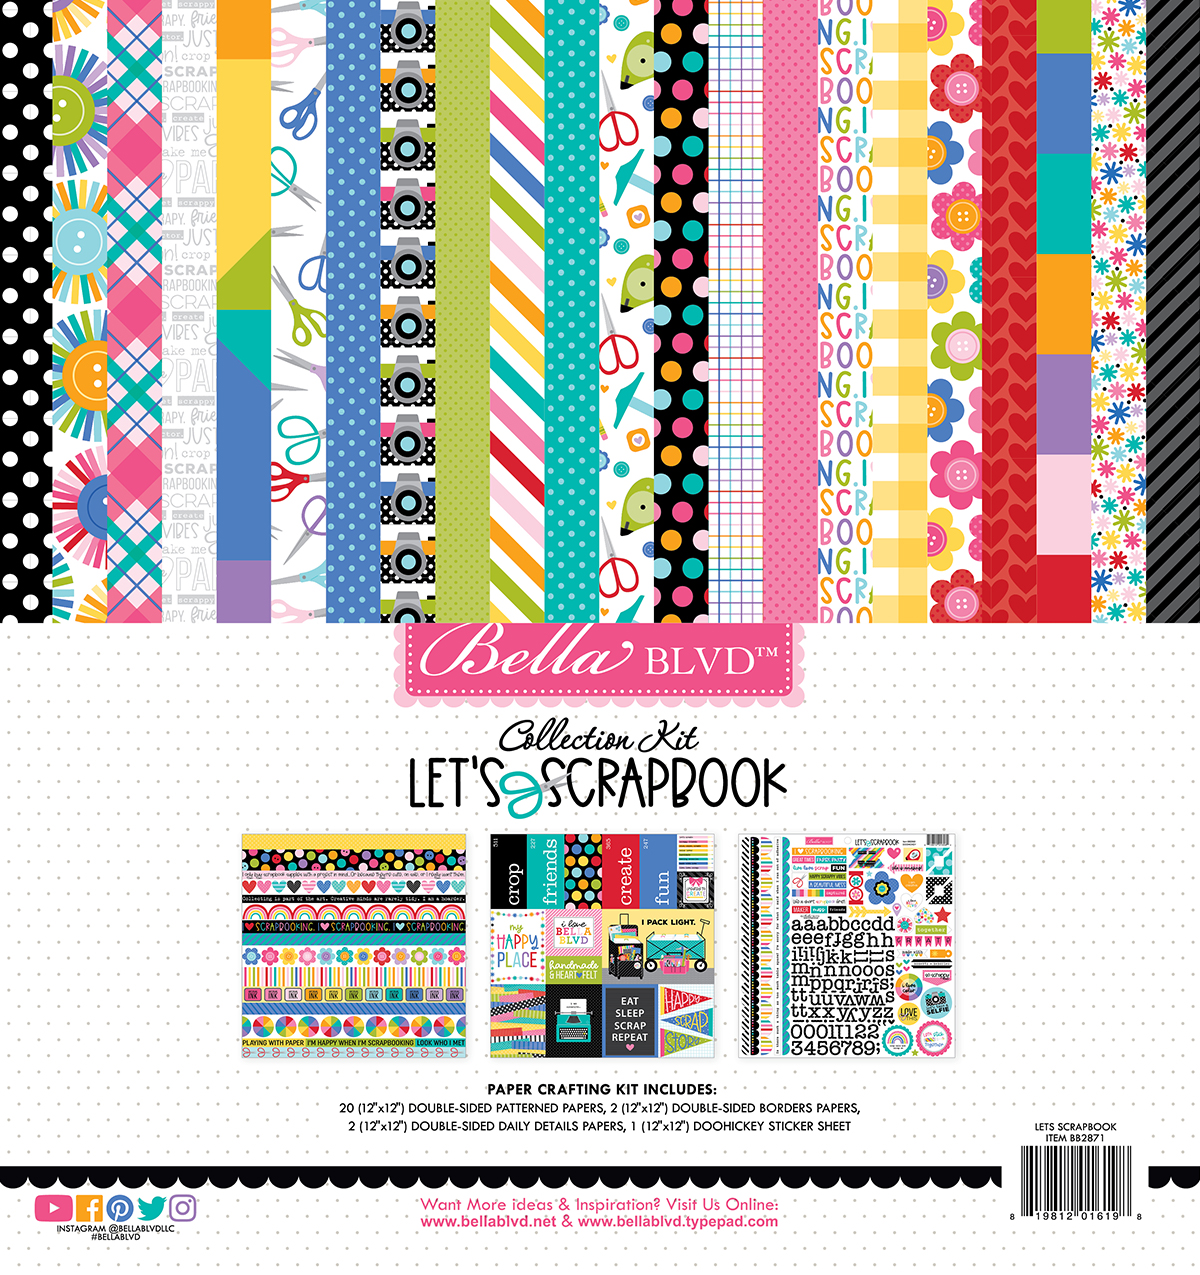 BB Let’s Scrapbook Collection Kit